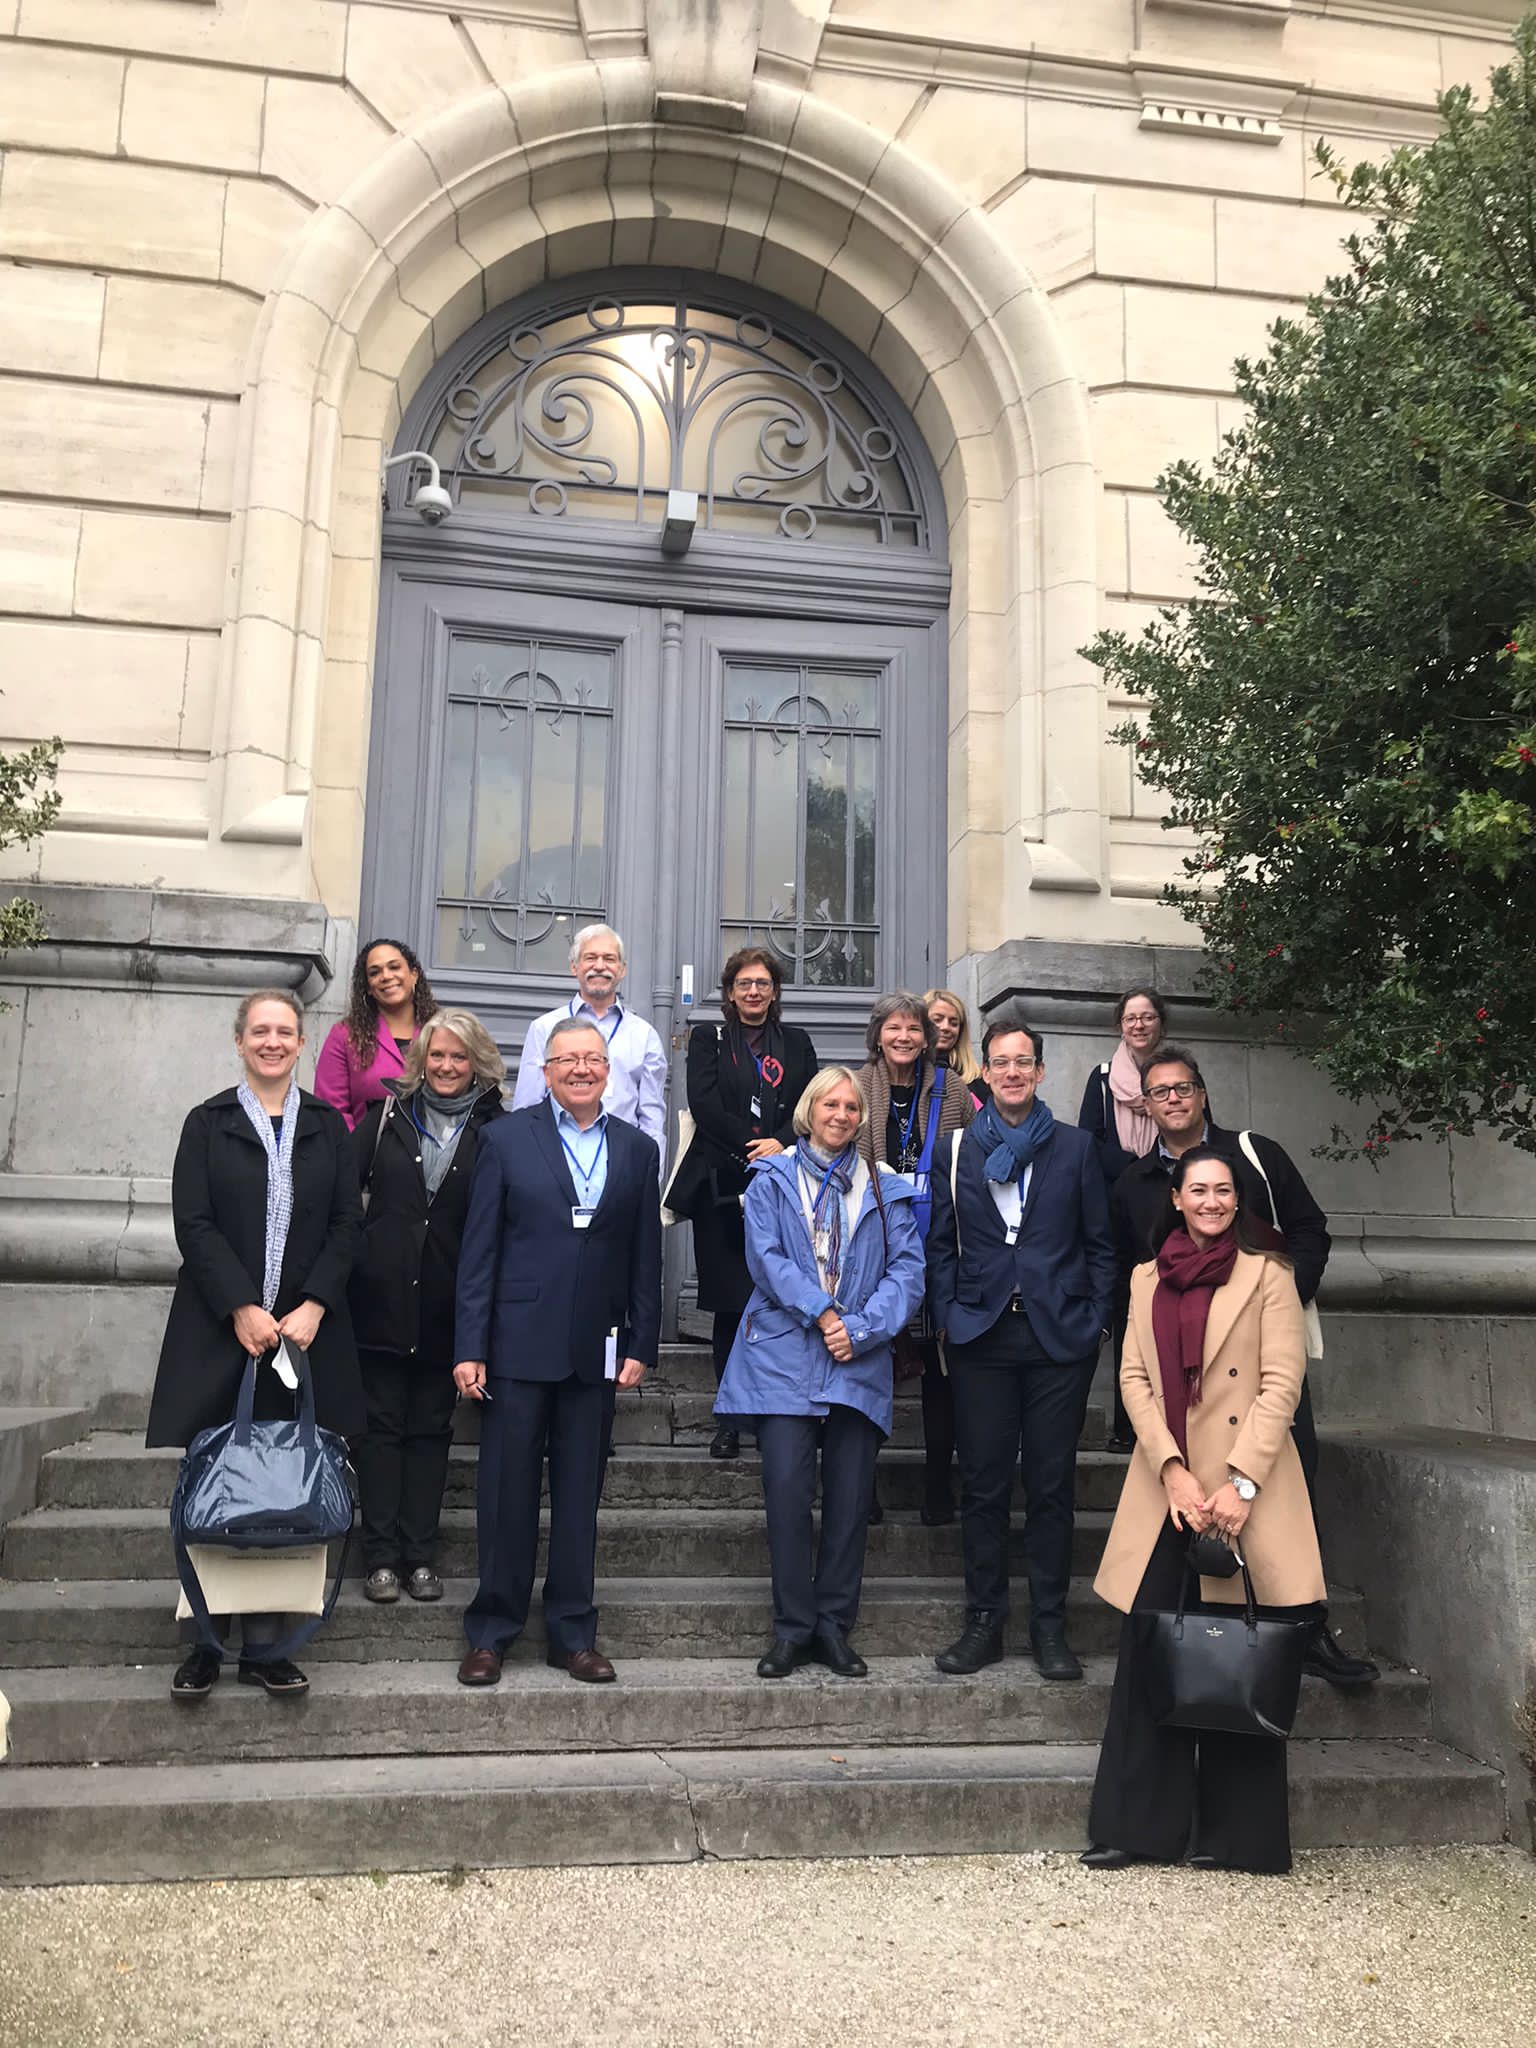 Hilary Landorf (front row, third from right) with the 2021 Fulbright IEA Seminar Cohort in France